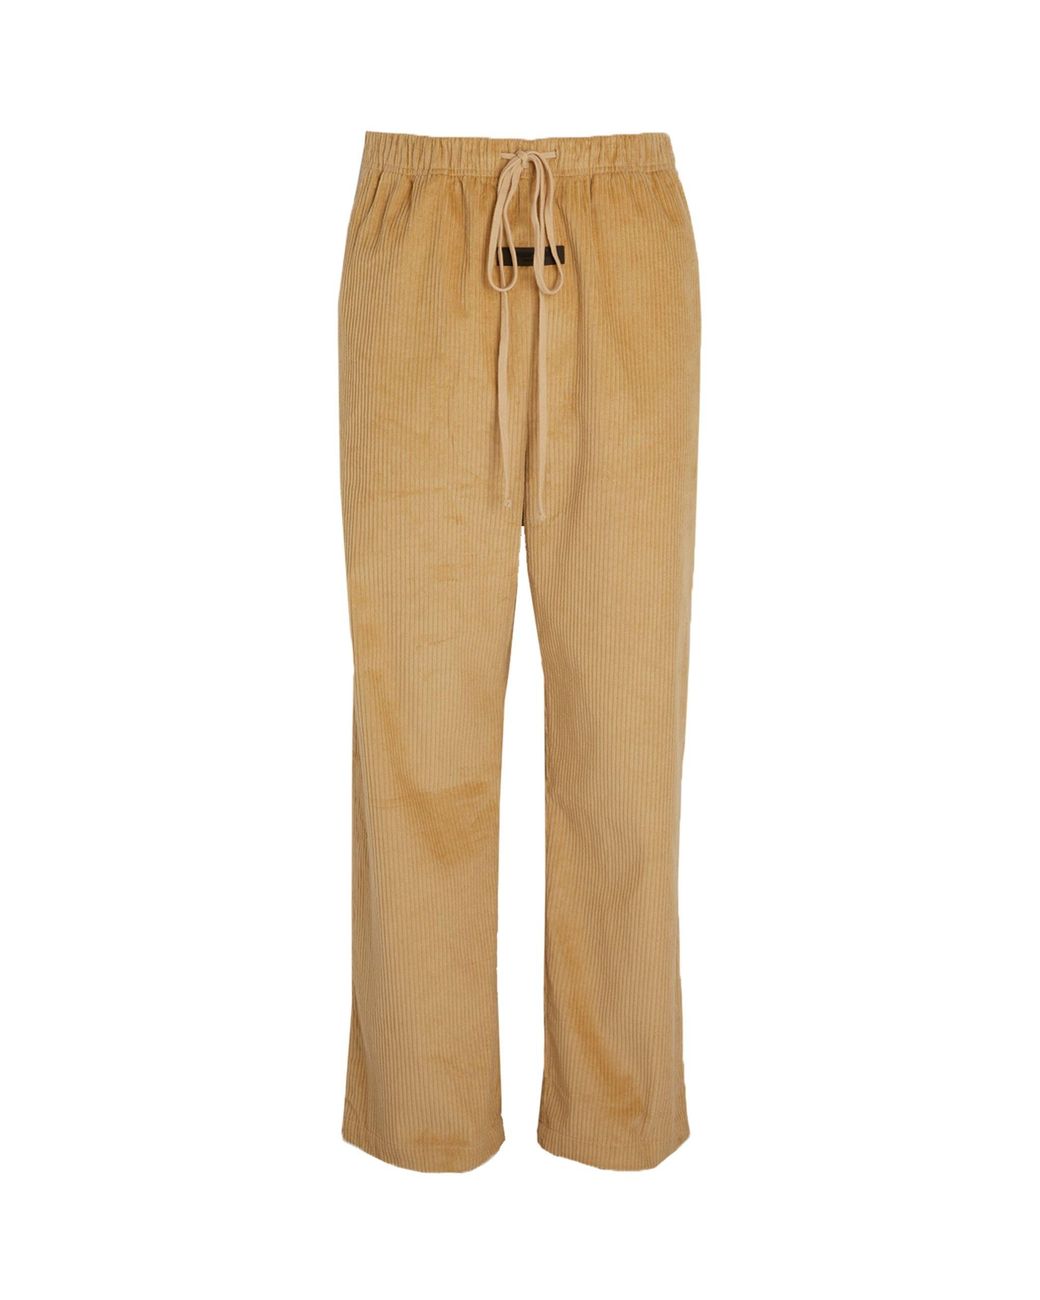 Fear of God ESSENTIALS Corduroy Drawstring Trousers in Natural for Men ...